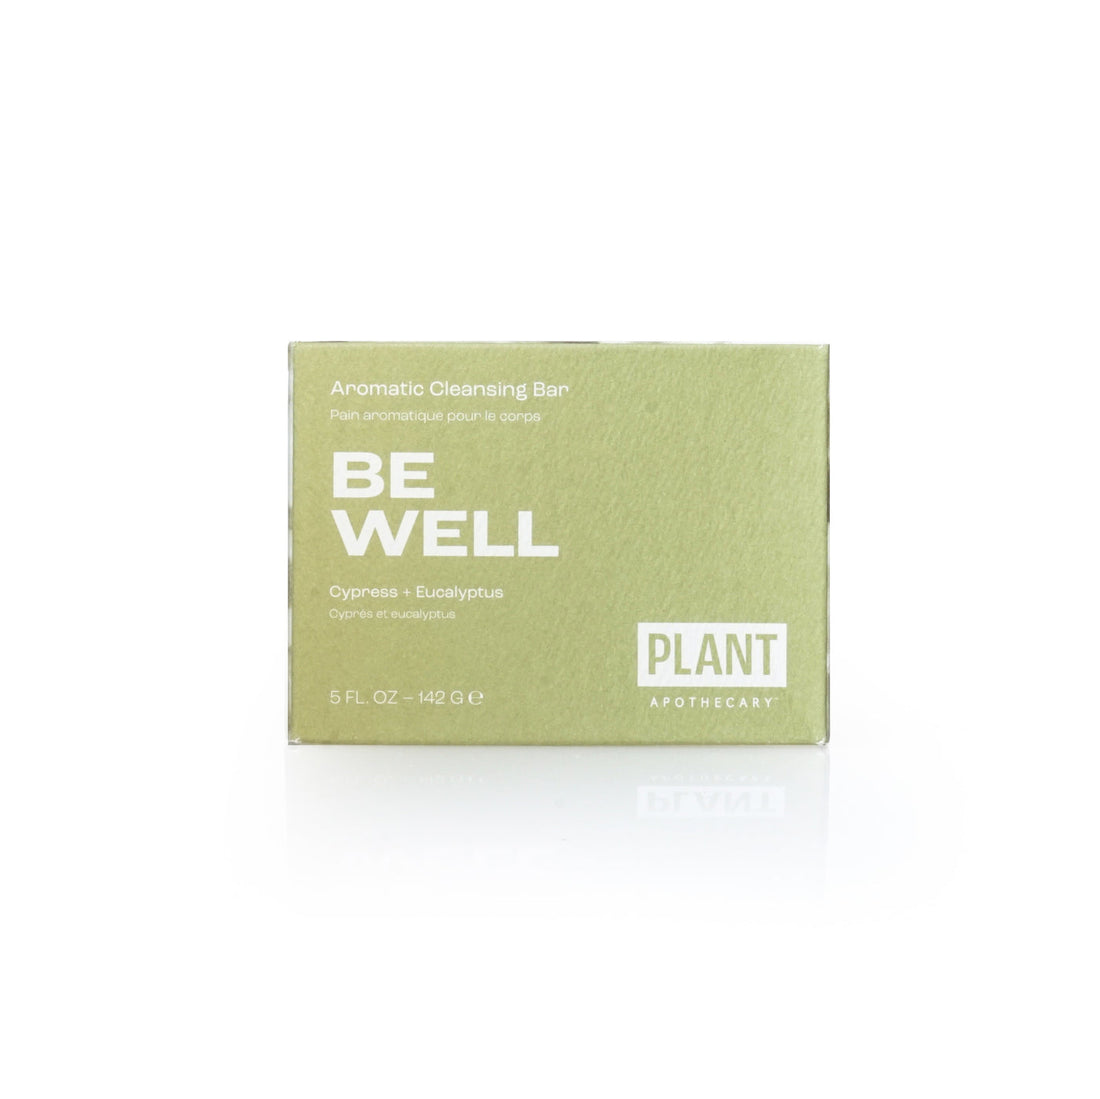 Plant Apothecary Aromatic Cleansing Bar